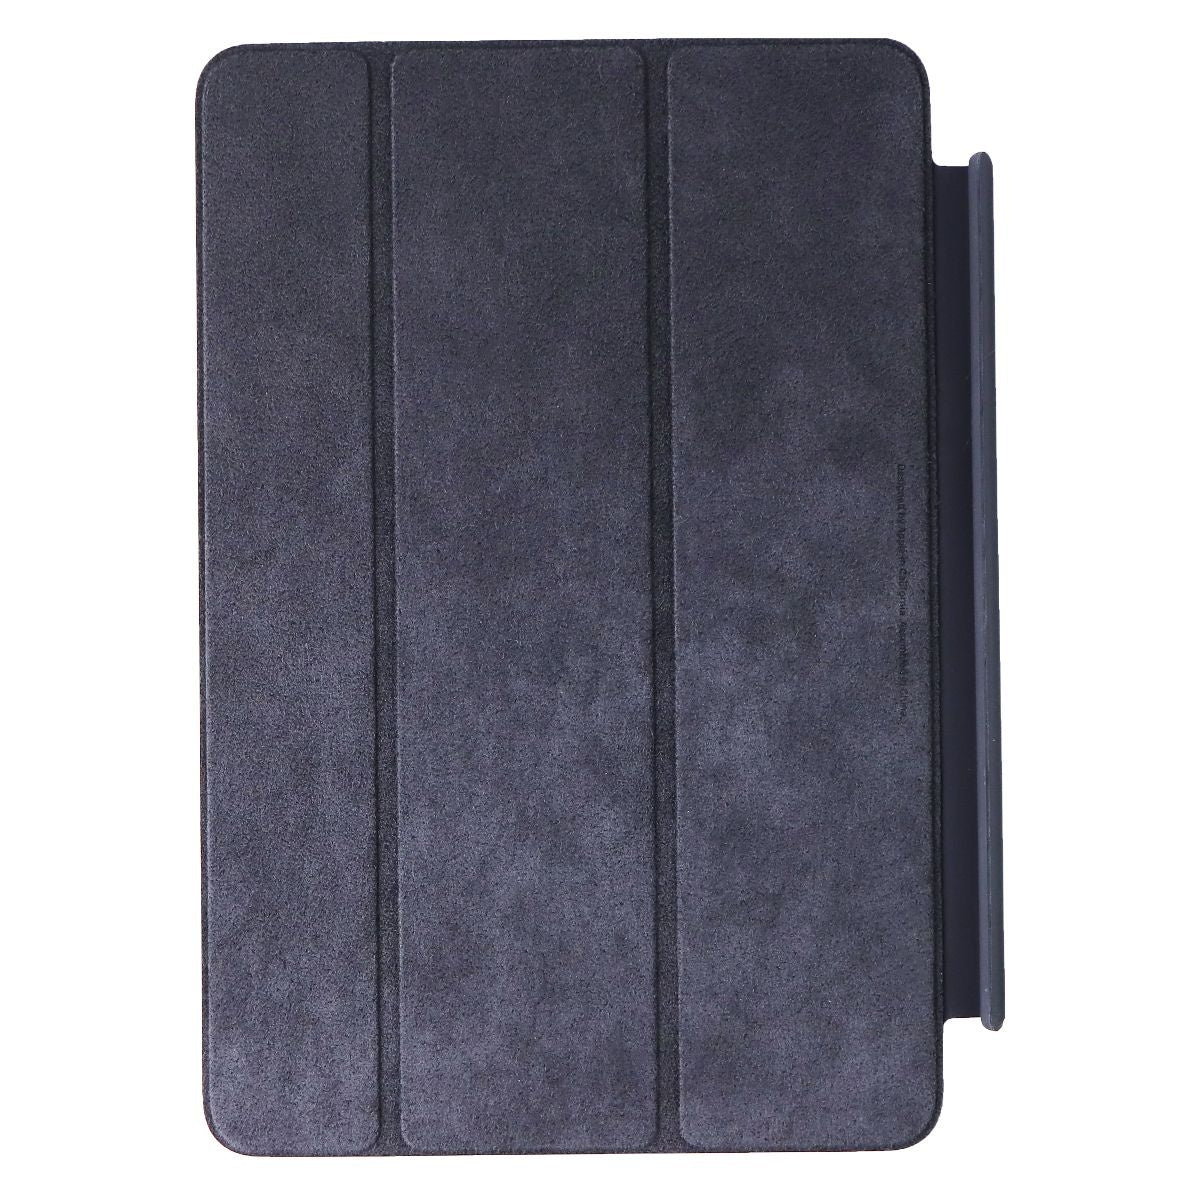 Apple Smart Cover for iPad mini 5th Gen (2019 Model) / Mini 4 - Charcoal Gray iPad/Tablet Accessories - Cases, Covers, Keyboard Folios Apple    - Simple Cell Bulk Wholesale Pricing - USA Seller